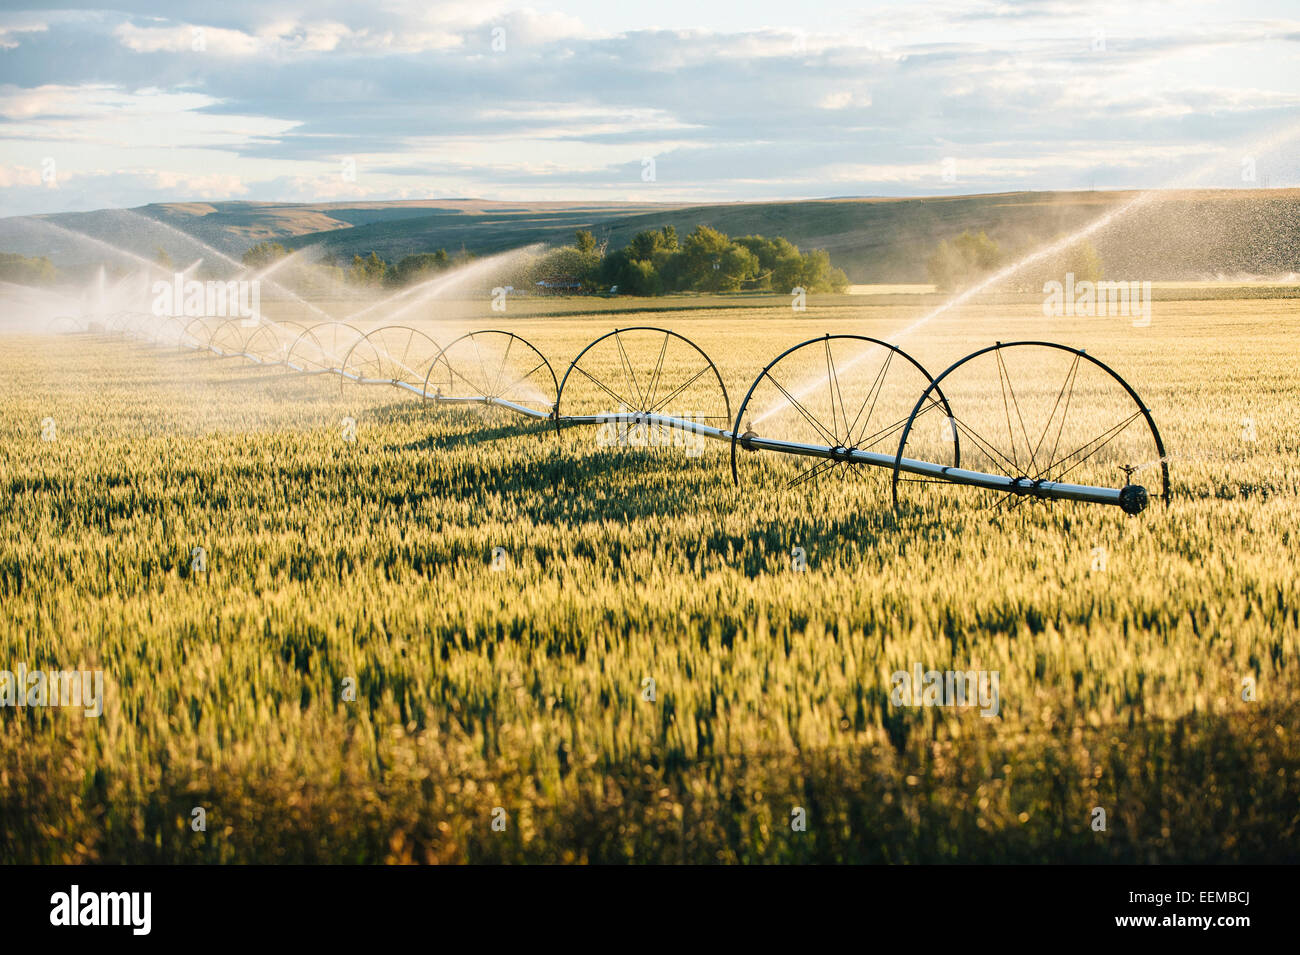 Irrigation system watering crops on farm field Stock Photo